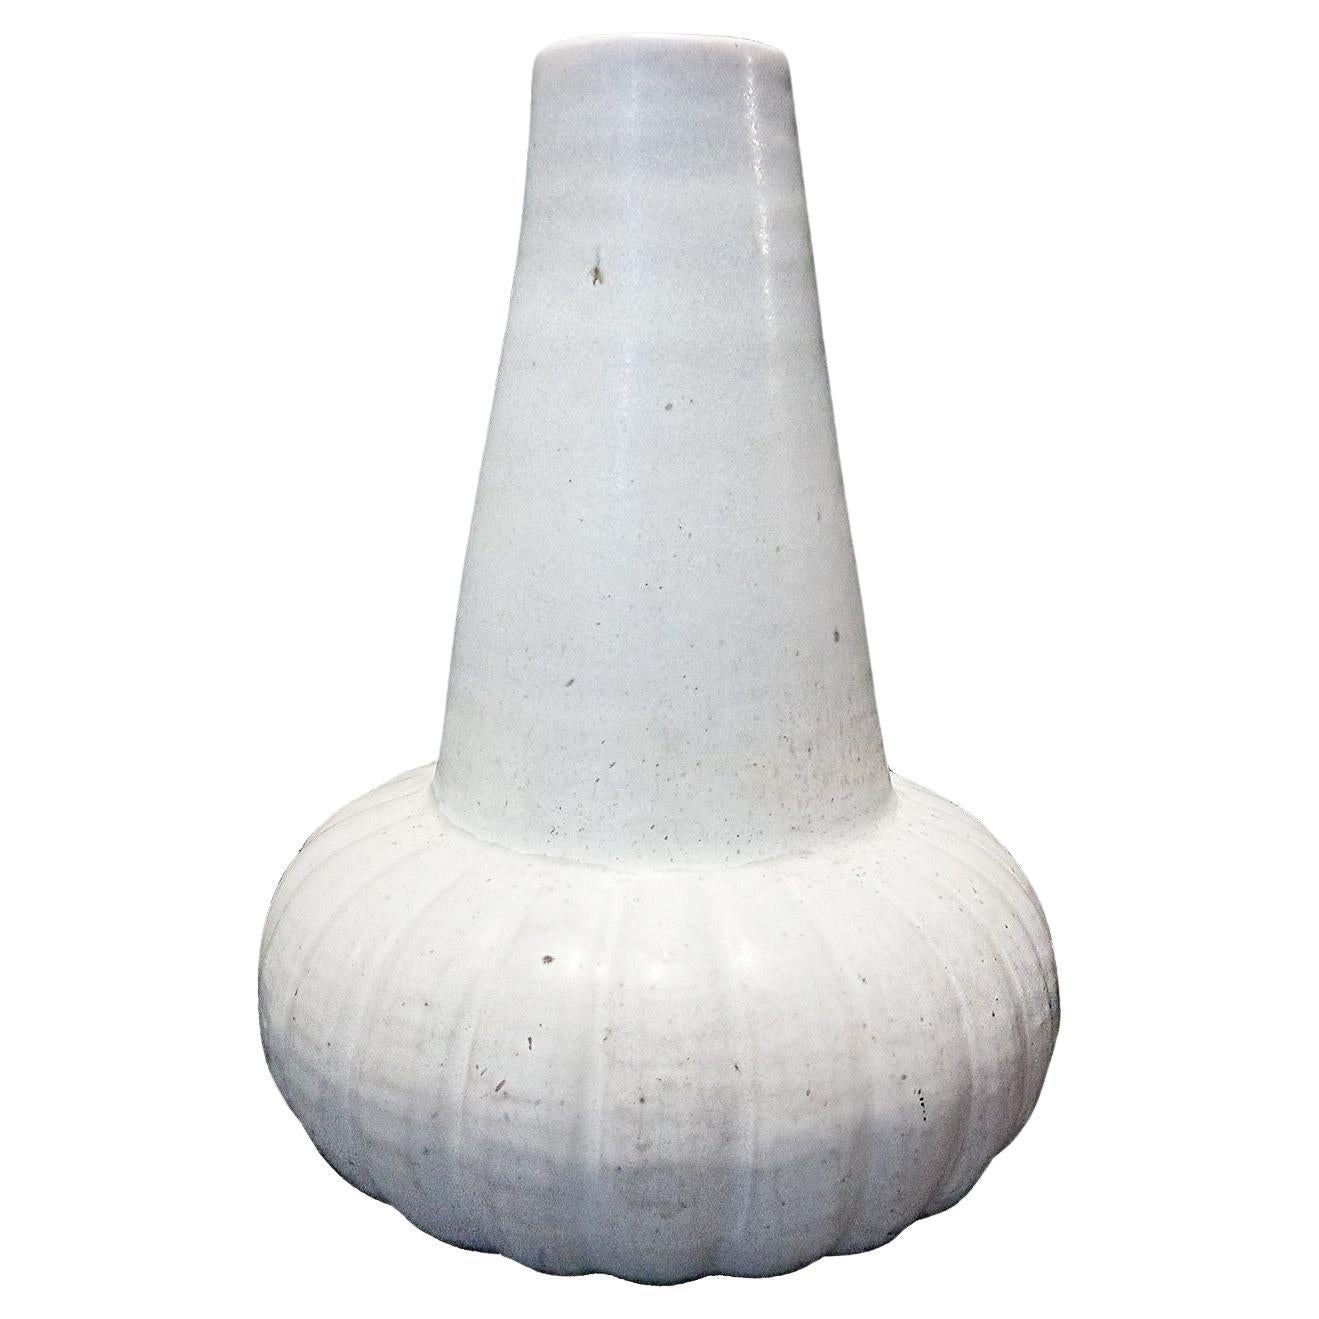 A ceramic vase from Thailand, with off-white glaze. Contemporary. 

While the golden age of Thai ceramics ended around the 15-16th Centuries, local craftsmen perpetuated the art through generations, later producing a smaller number of pieces with